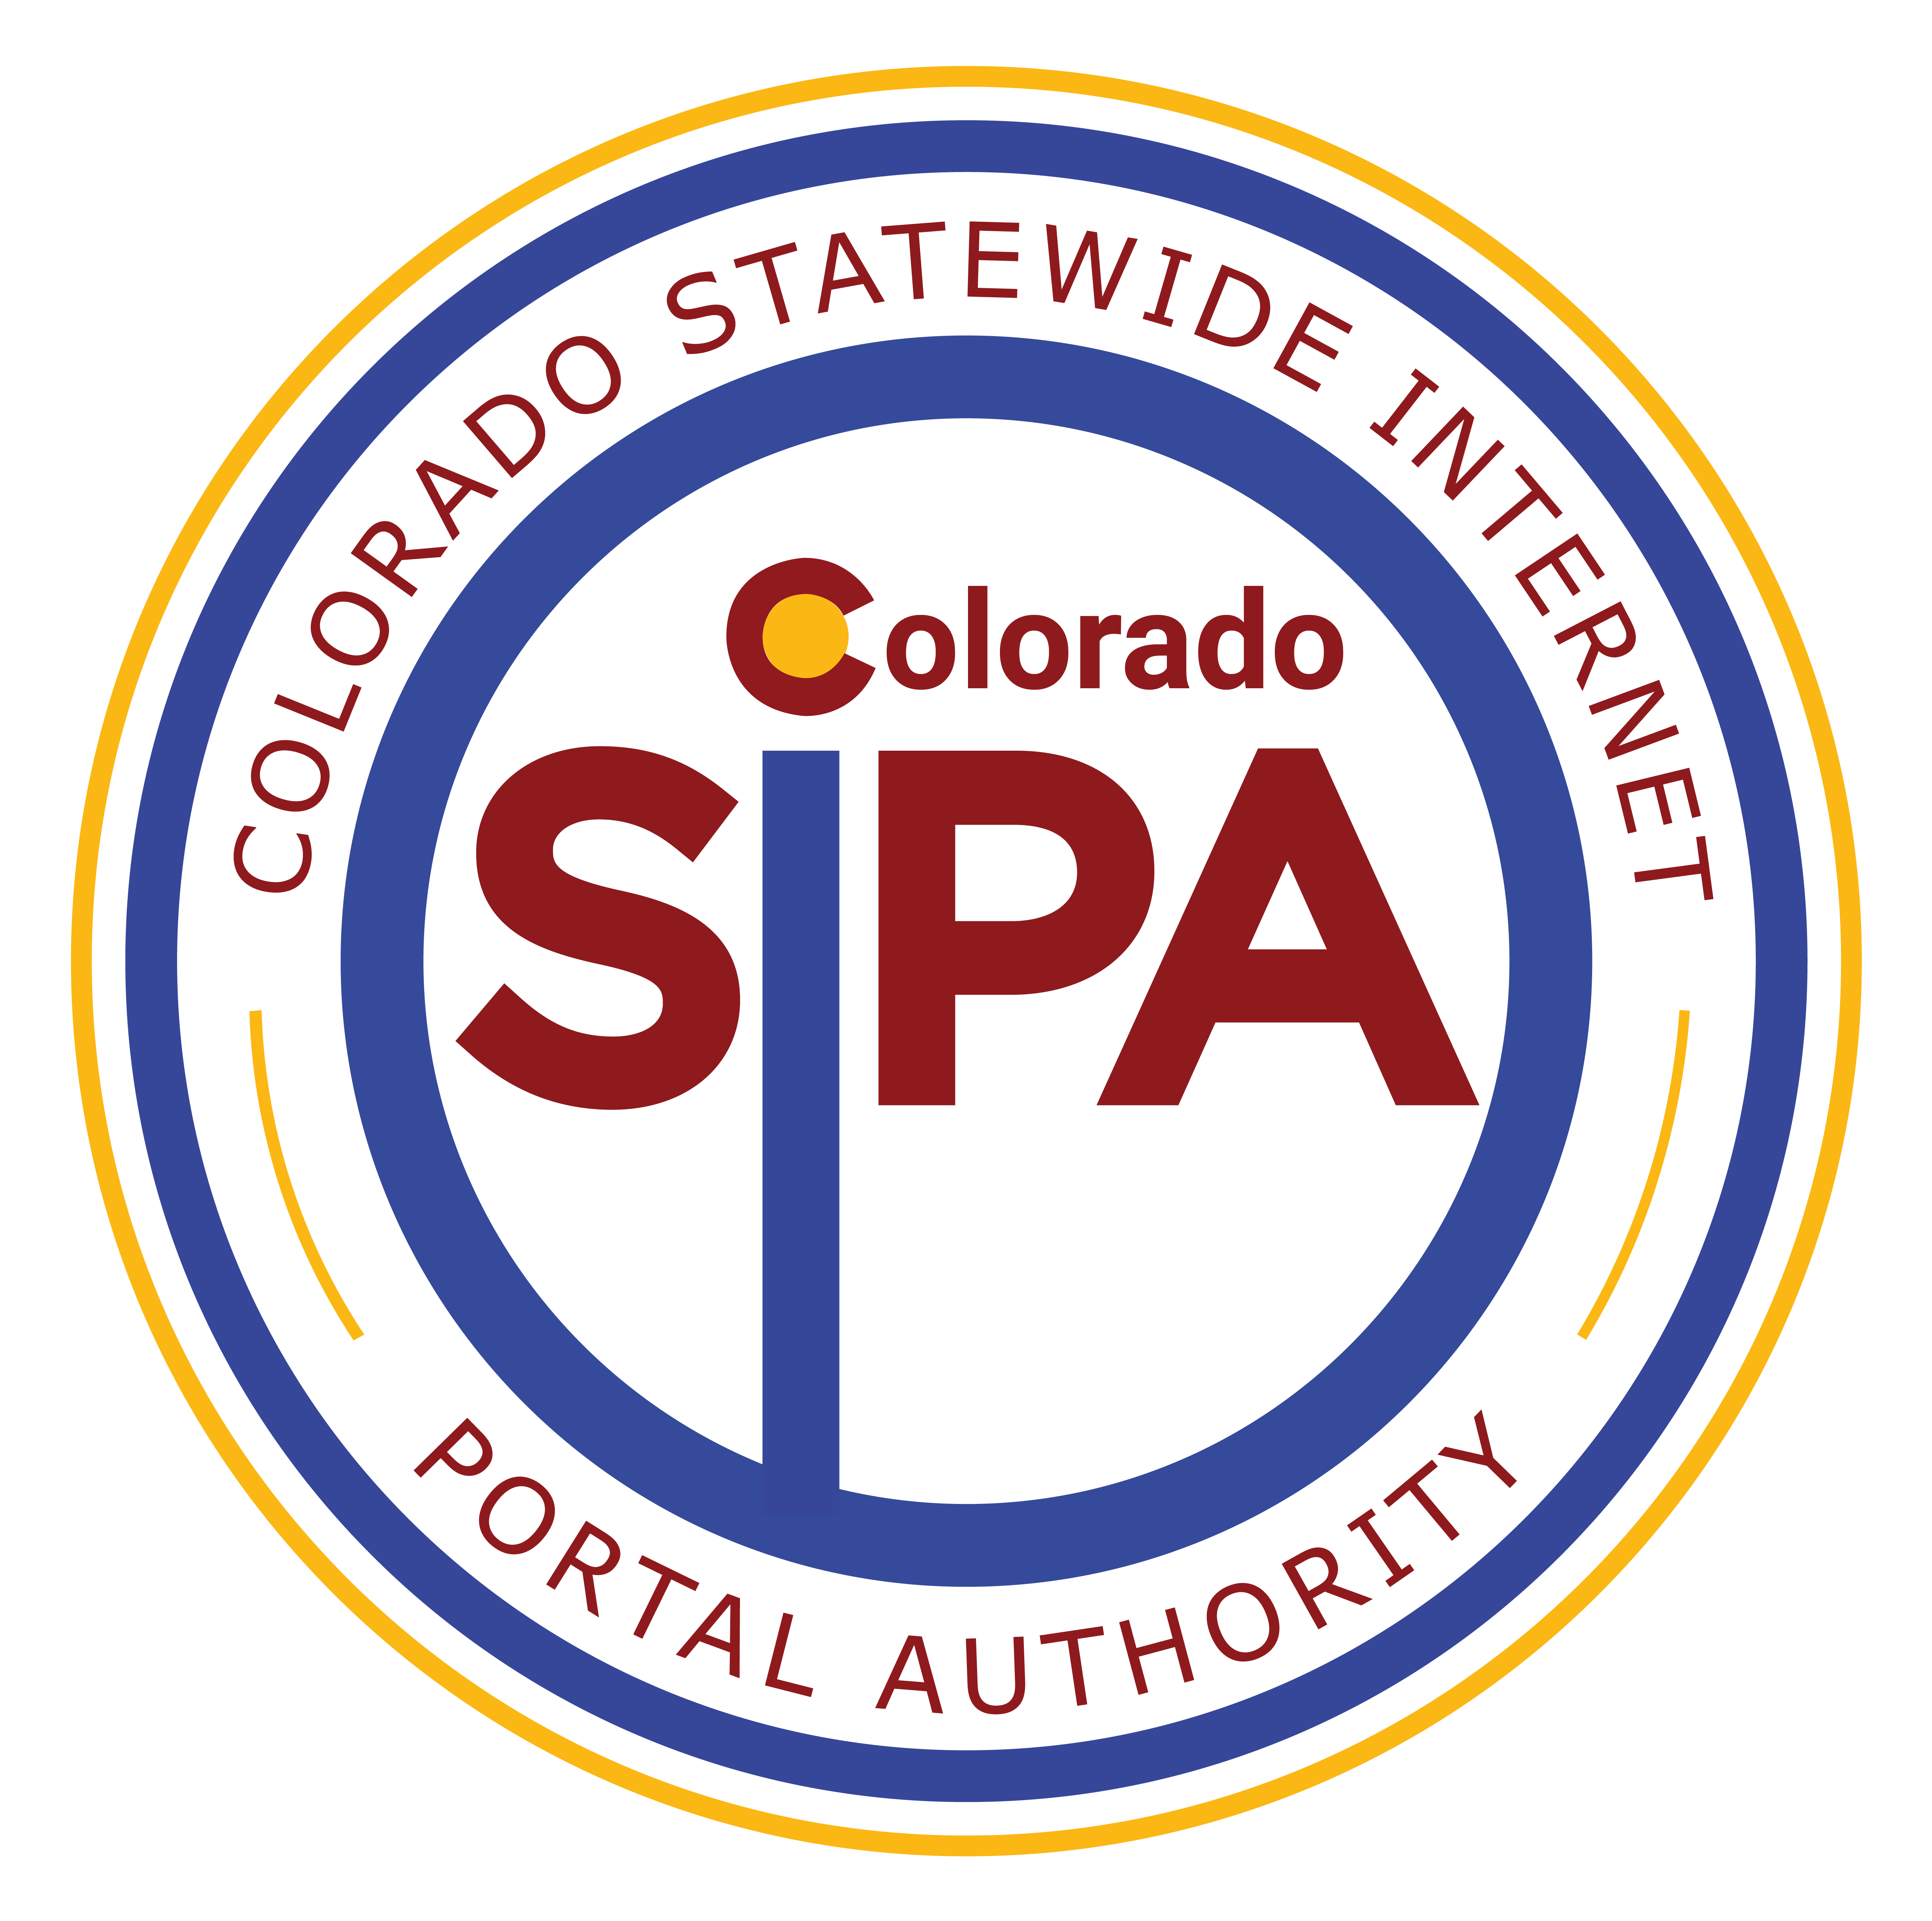 Statewide Internet Portal Authority